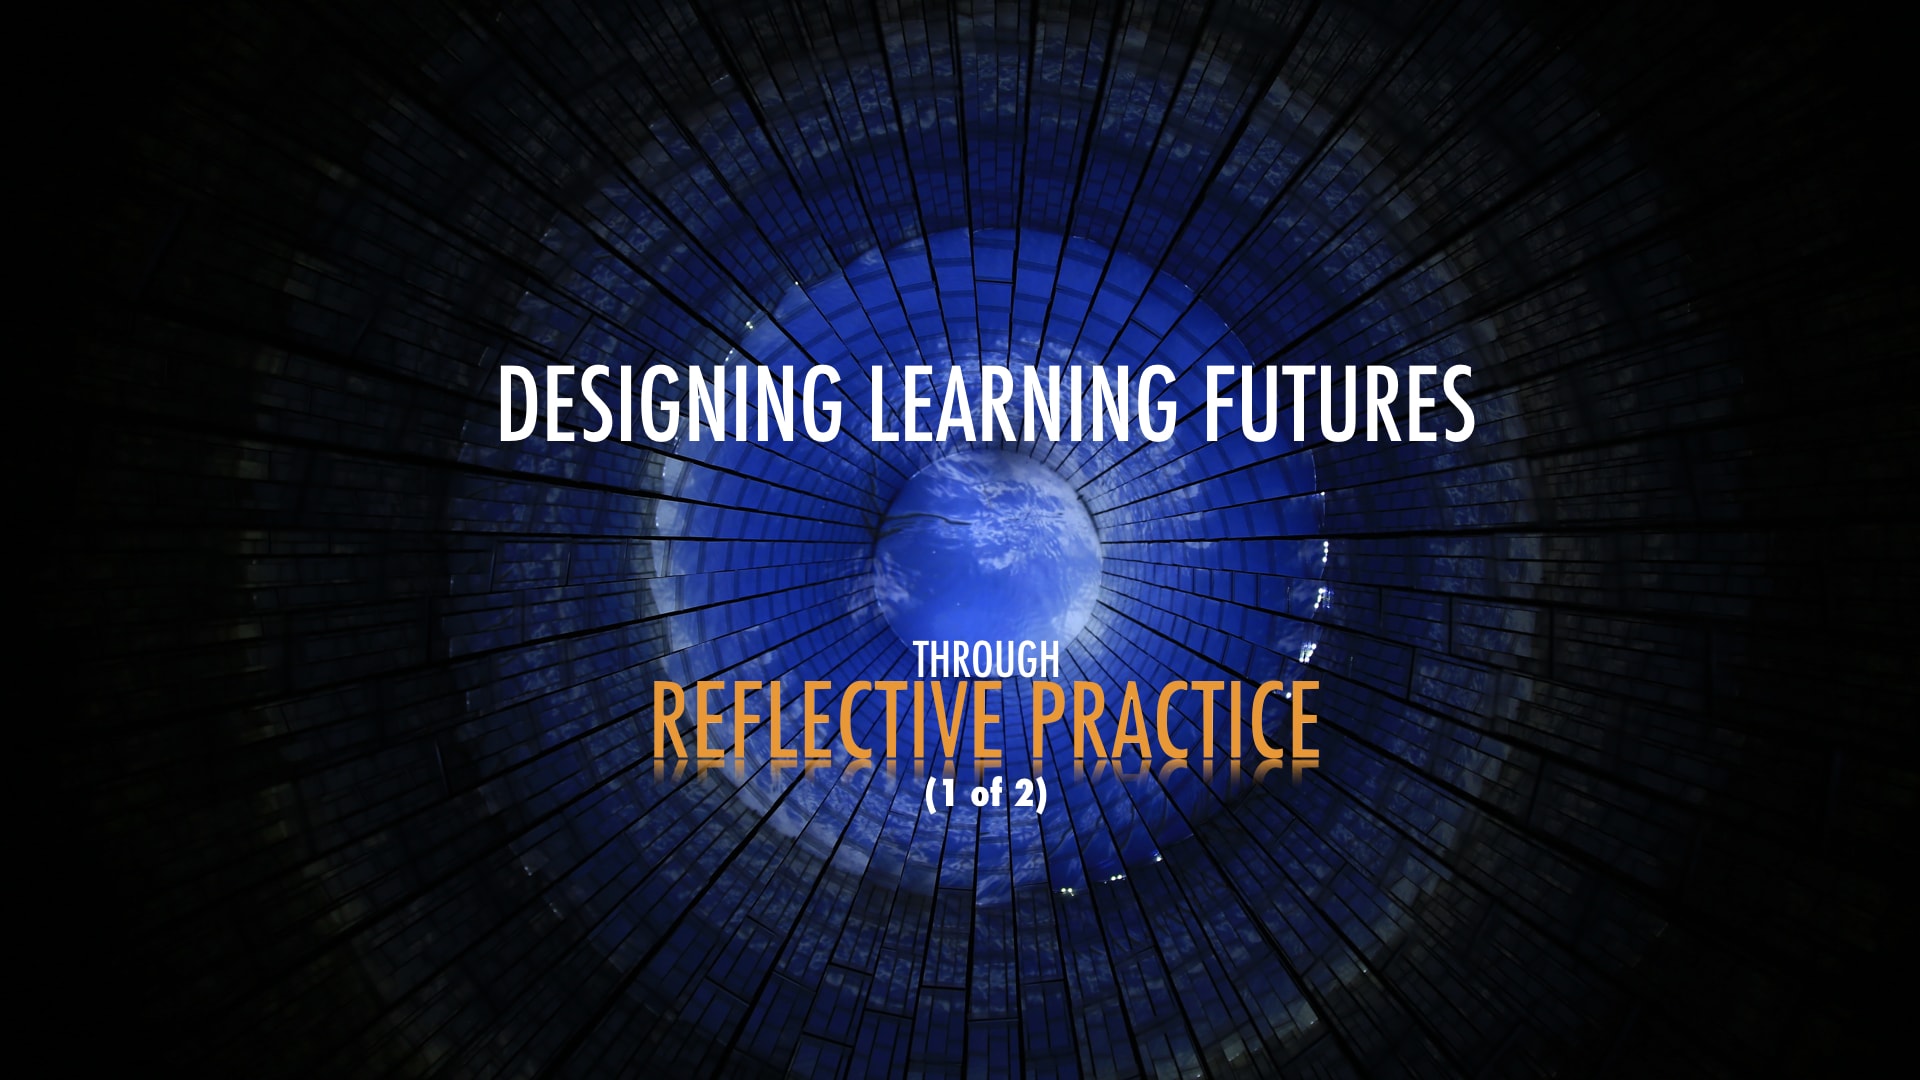 Designing learning futures through reflective practice: 1 of 2